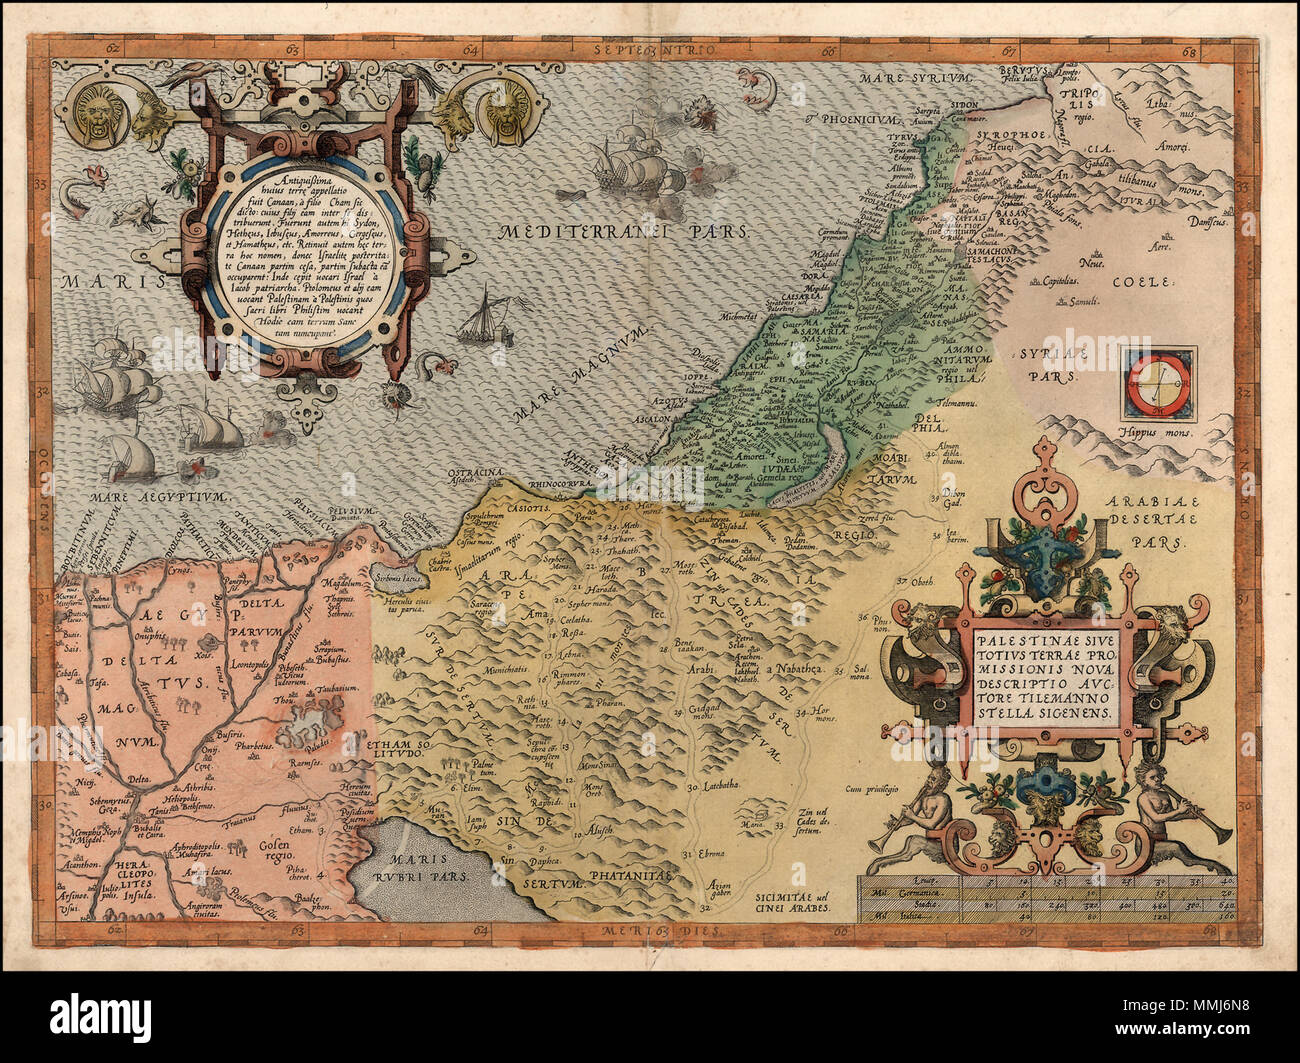 .  English: A nice example of Ortelius' map of the Holy Land, from the 1572 German edition of his Theatrum Orbis Terrarum, the first modern atlas. The map shows all of the Holy Lands with Egypt. In the upper left is a text box describing the region. In the bottom right is a fine title cartouche with mileage scale below it. Five sailing ships and a sea monster in the ocean. References: Van Den Broecke 170  Latina: Palestinae Sive Totius Terrae Promissionis Nova Descriptio Auctore Tilemanno Stella Sigenens. 1572. Abraham Ortelius. Palestinae Sive Totius Terrae Promissionis Nova Descriptio Auctor Stock Photo